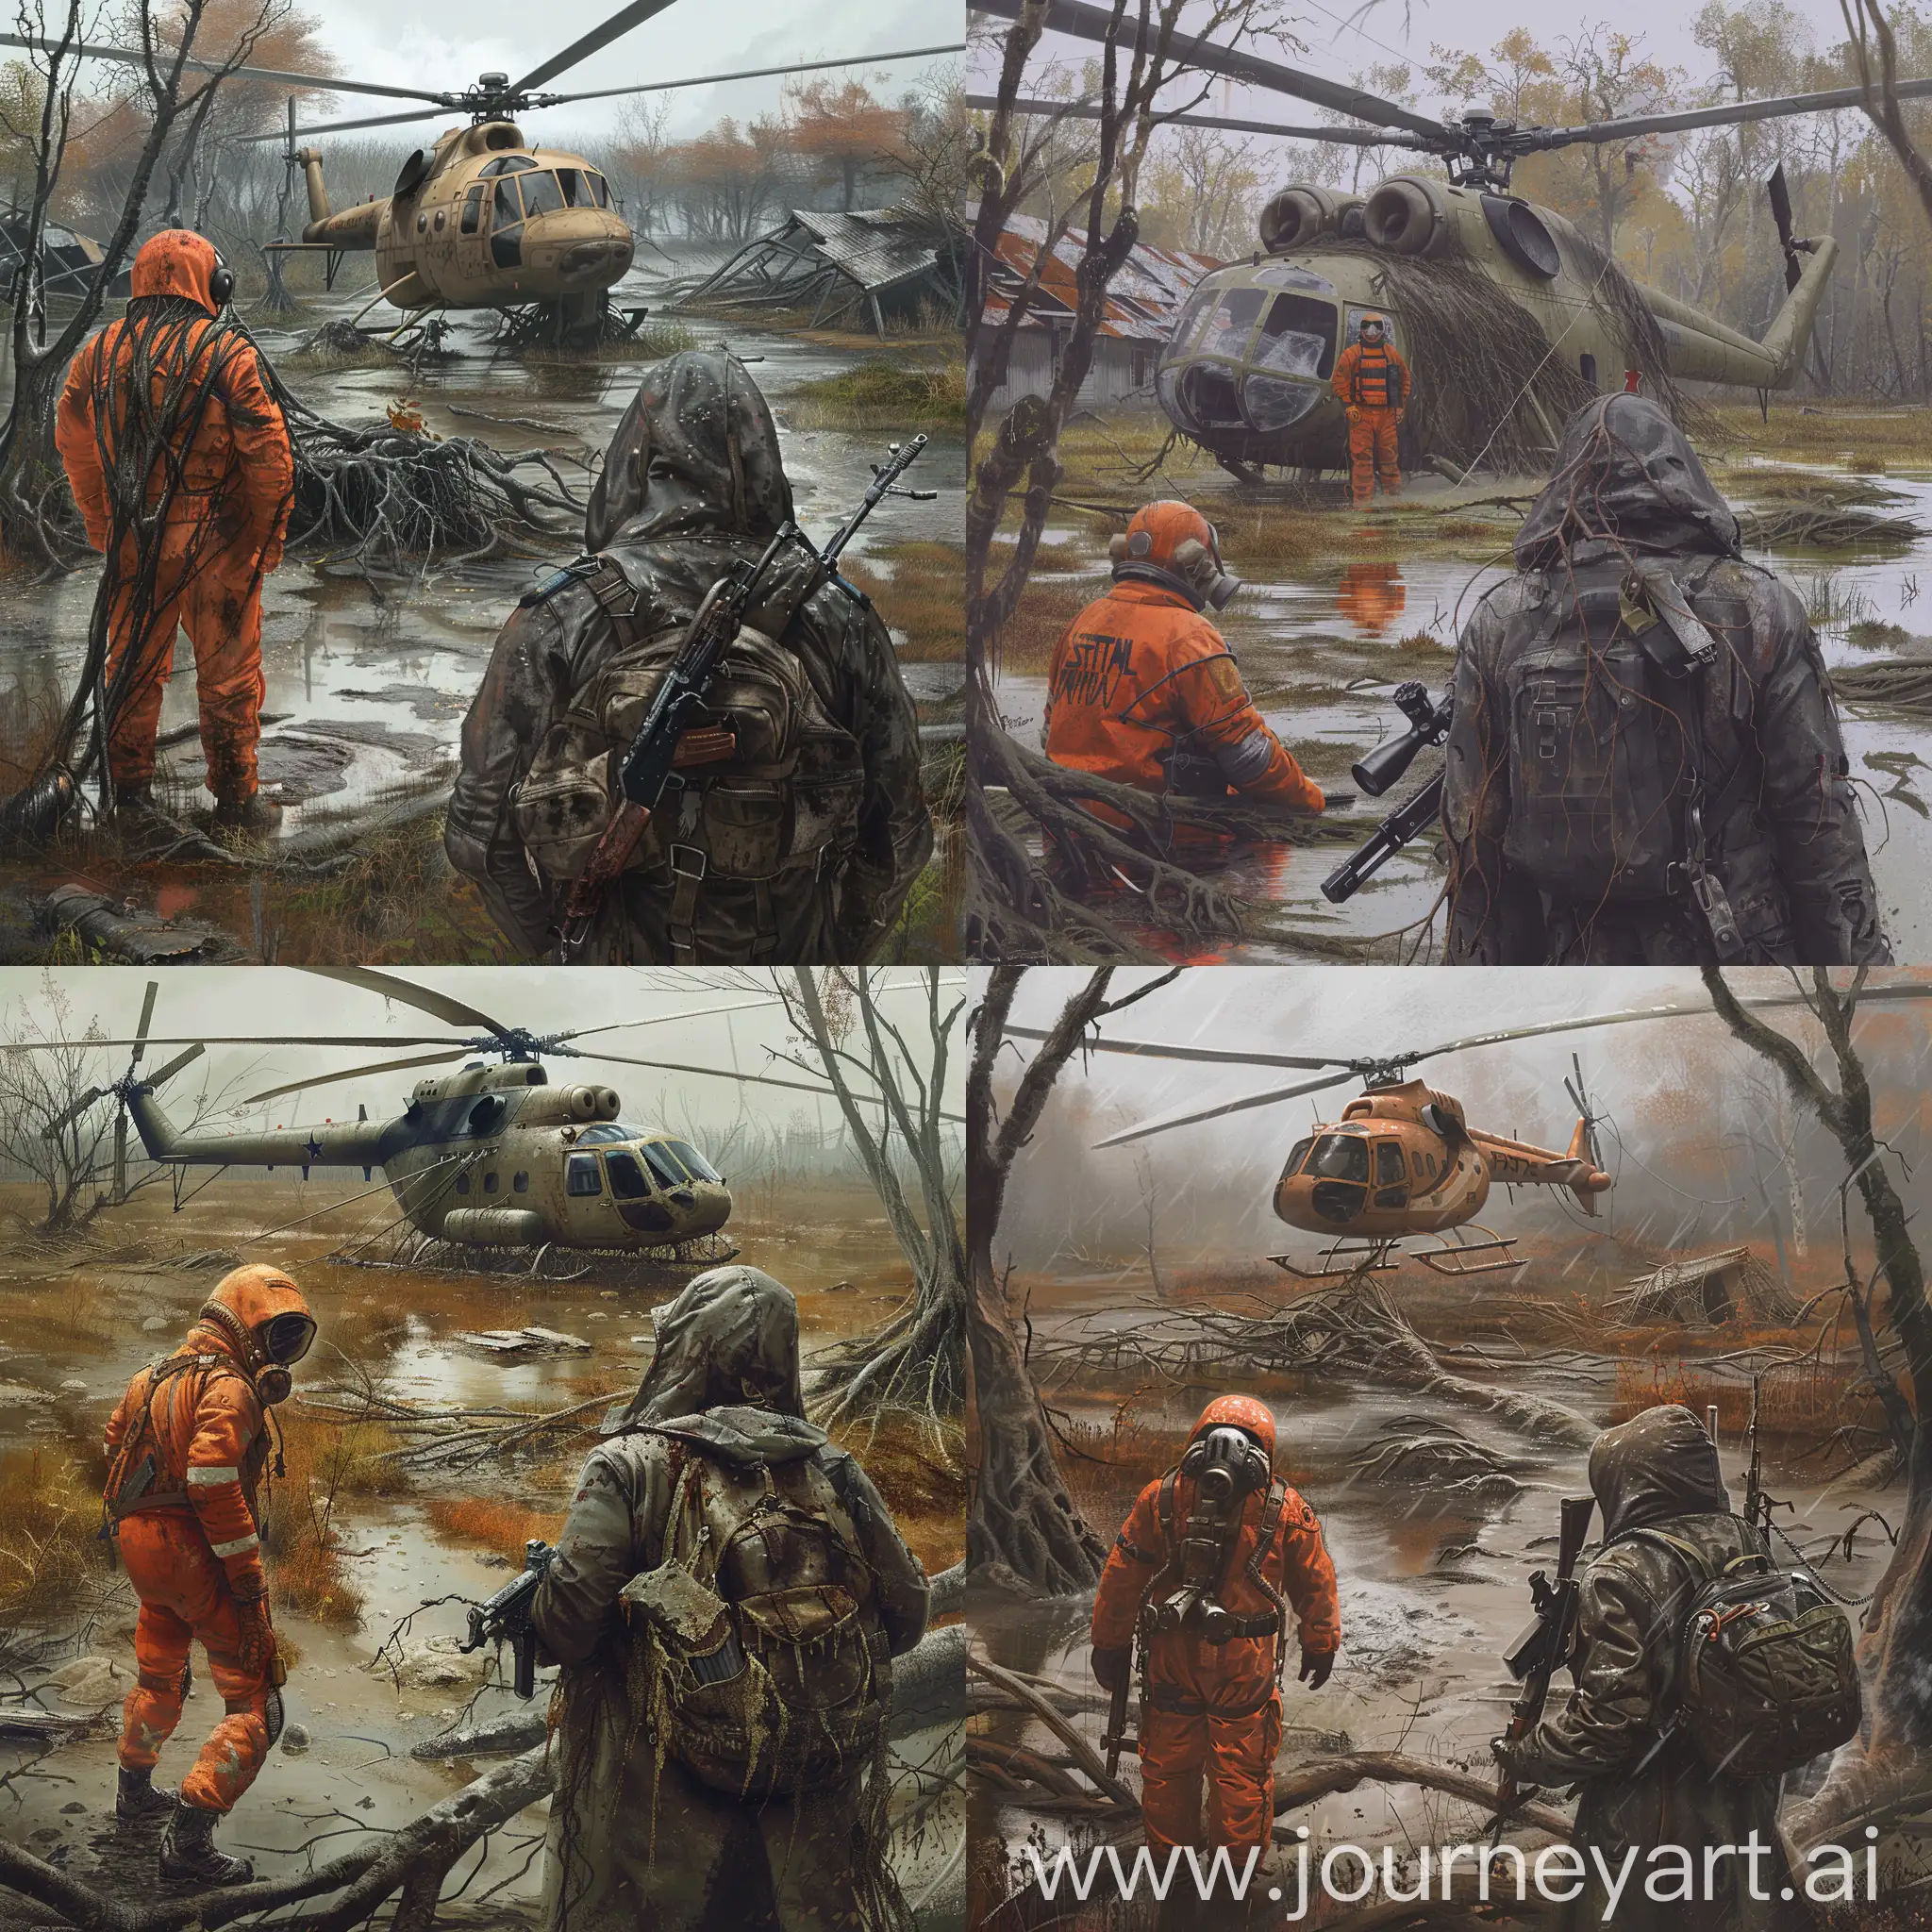 S.T.A.L.K.E.R. art, a dirty toxic swamp, abandoned Chernobyl, an abandoned village, a military helicopter that is wrapped in roots and destroyed, 2 characters, the first character is dressed in an orange Soviet space suit, in front of this character is a stalker in a dark gray dirty leather raincoat with a gas mask on his face with a small backpack on his back and with a Dragunov SVD sniper rifle in his hands, the weather is a gloomy autumn, style of the fantastic illustrations of the 80s.